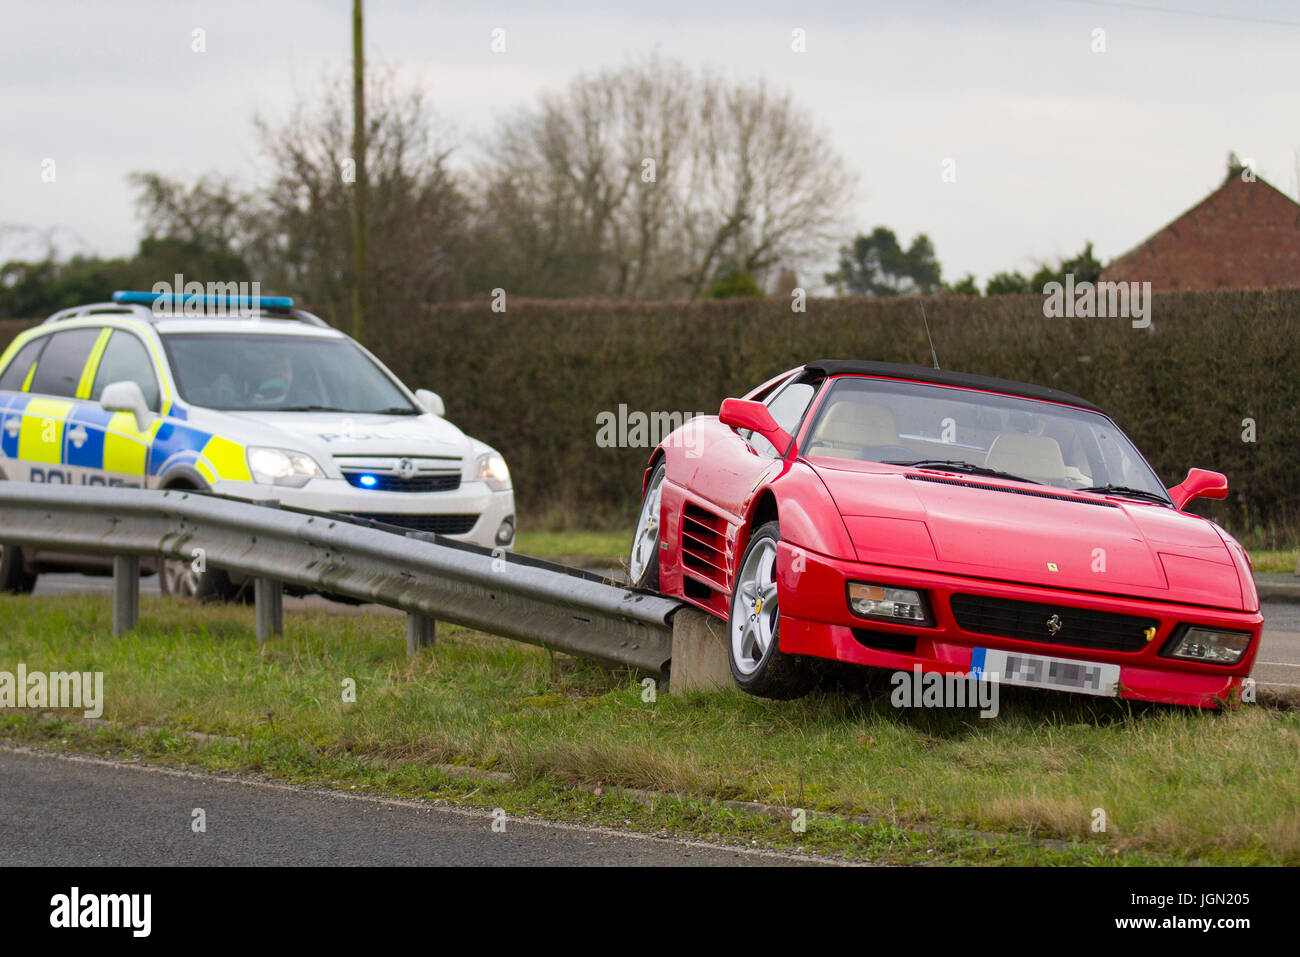 Ferrari 348 TS. crashed in Tarleton, Lancashire.  UK Weather. Lancashire Police traffic car attends road accident where a Ferrari 348 TS. has crashed in slippery in conditions on the Tarleton Bypass.  In a 1990 Car and Driver comparison test, a 348TS was described as having 'inexcusable handling,' and as 'a terrible car to drive fast. C Stock Photo